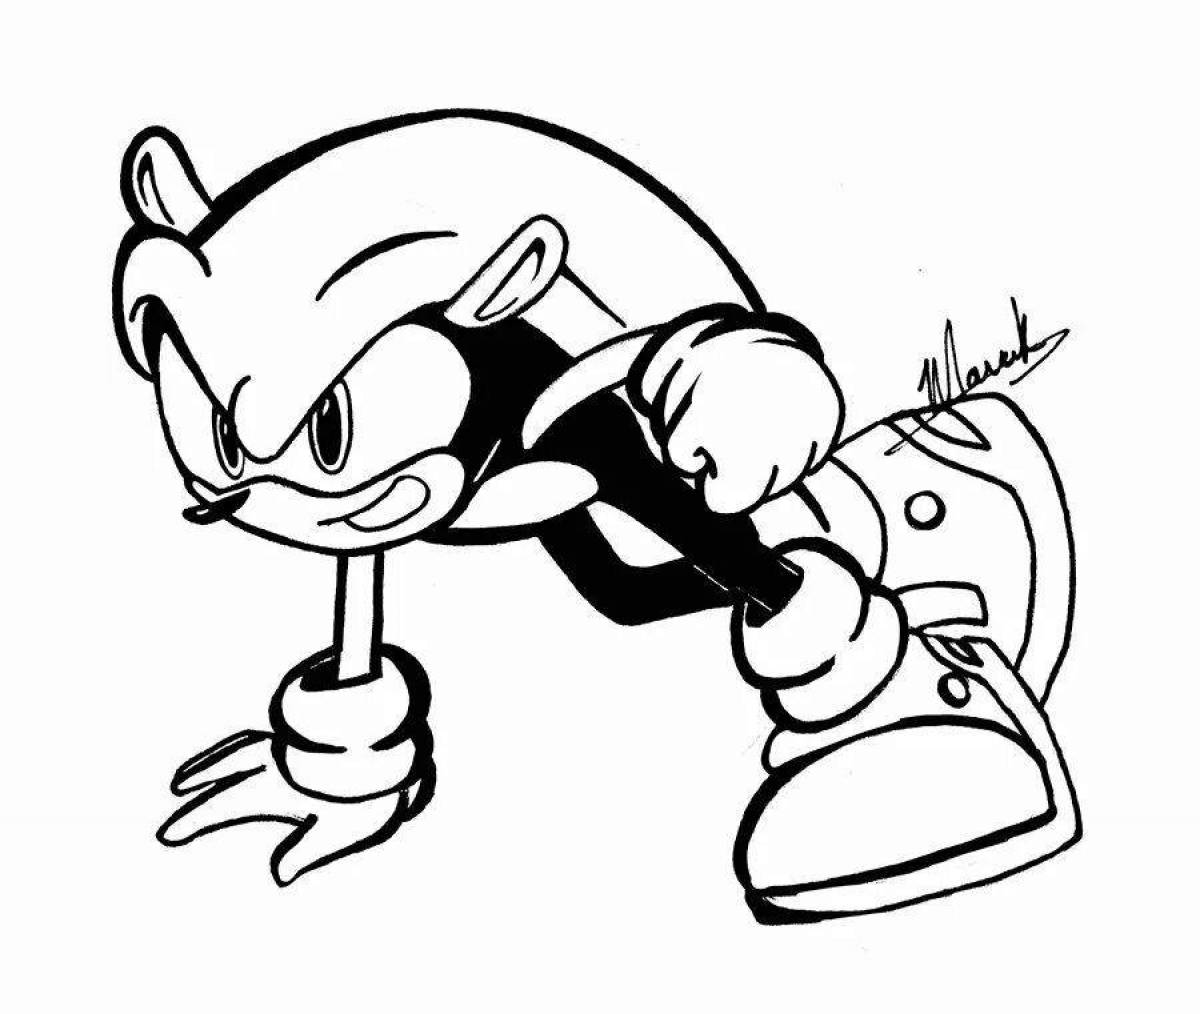 Intriguing sonic mania coloring book